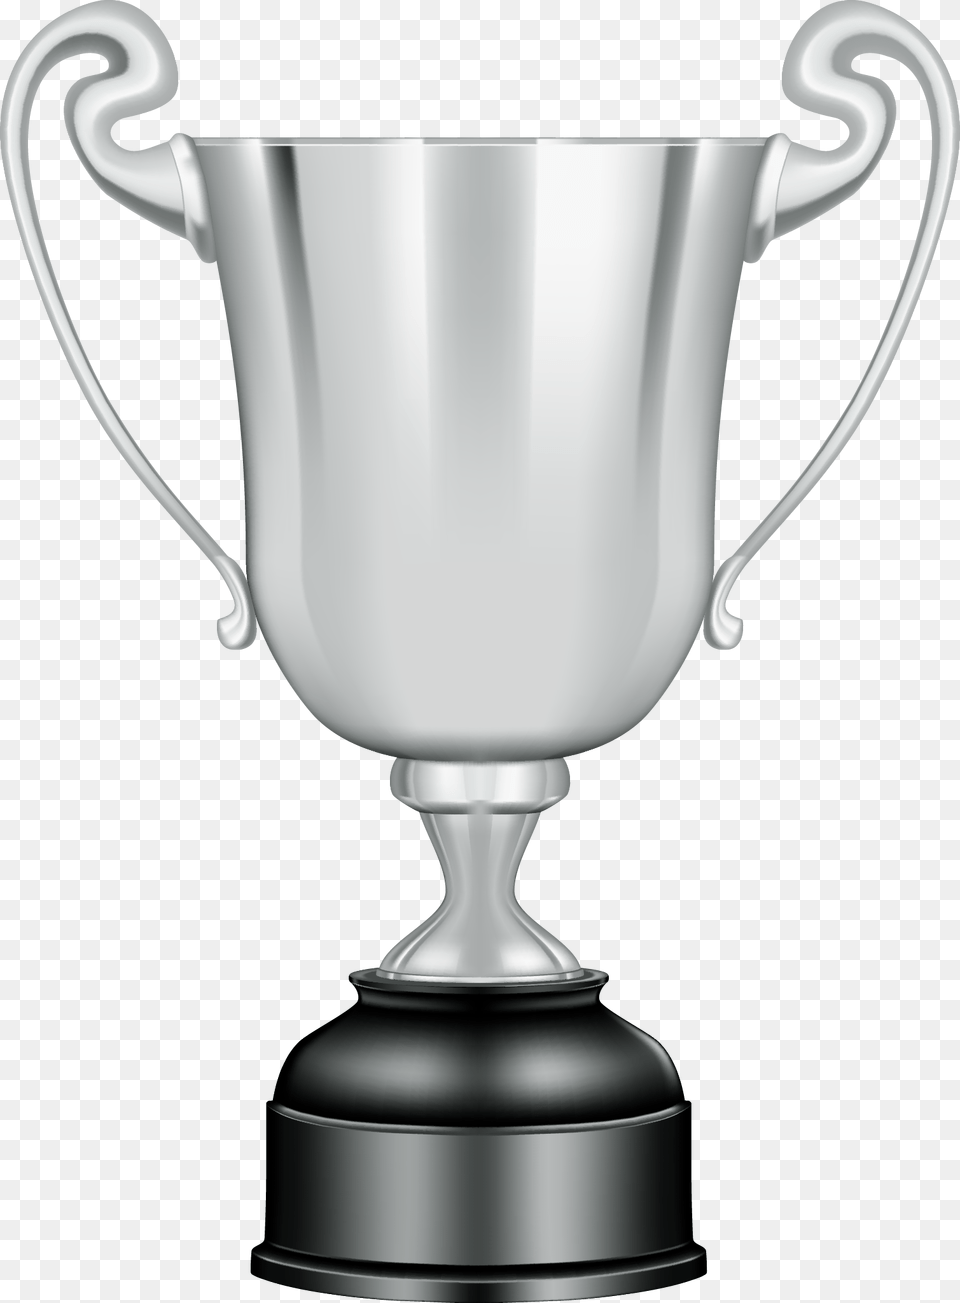 Silver Trophy Vector, Smoke Pipe Png